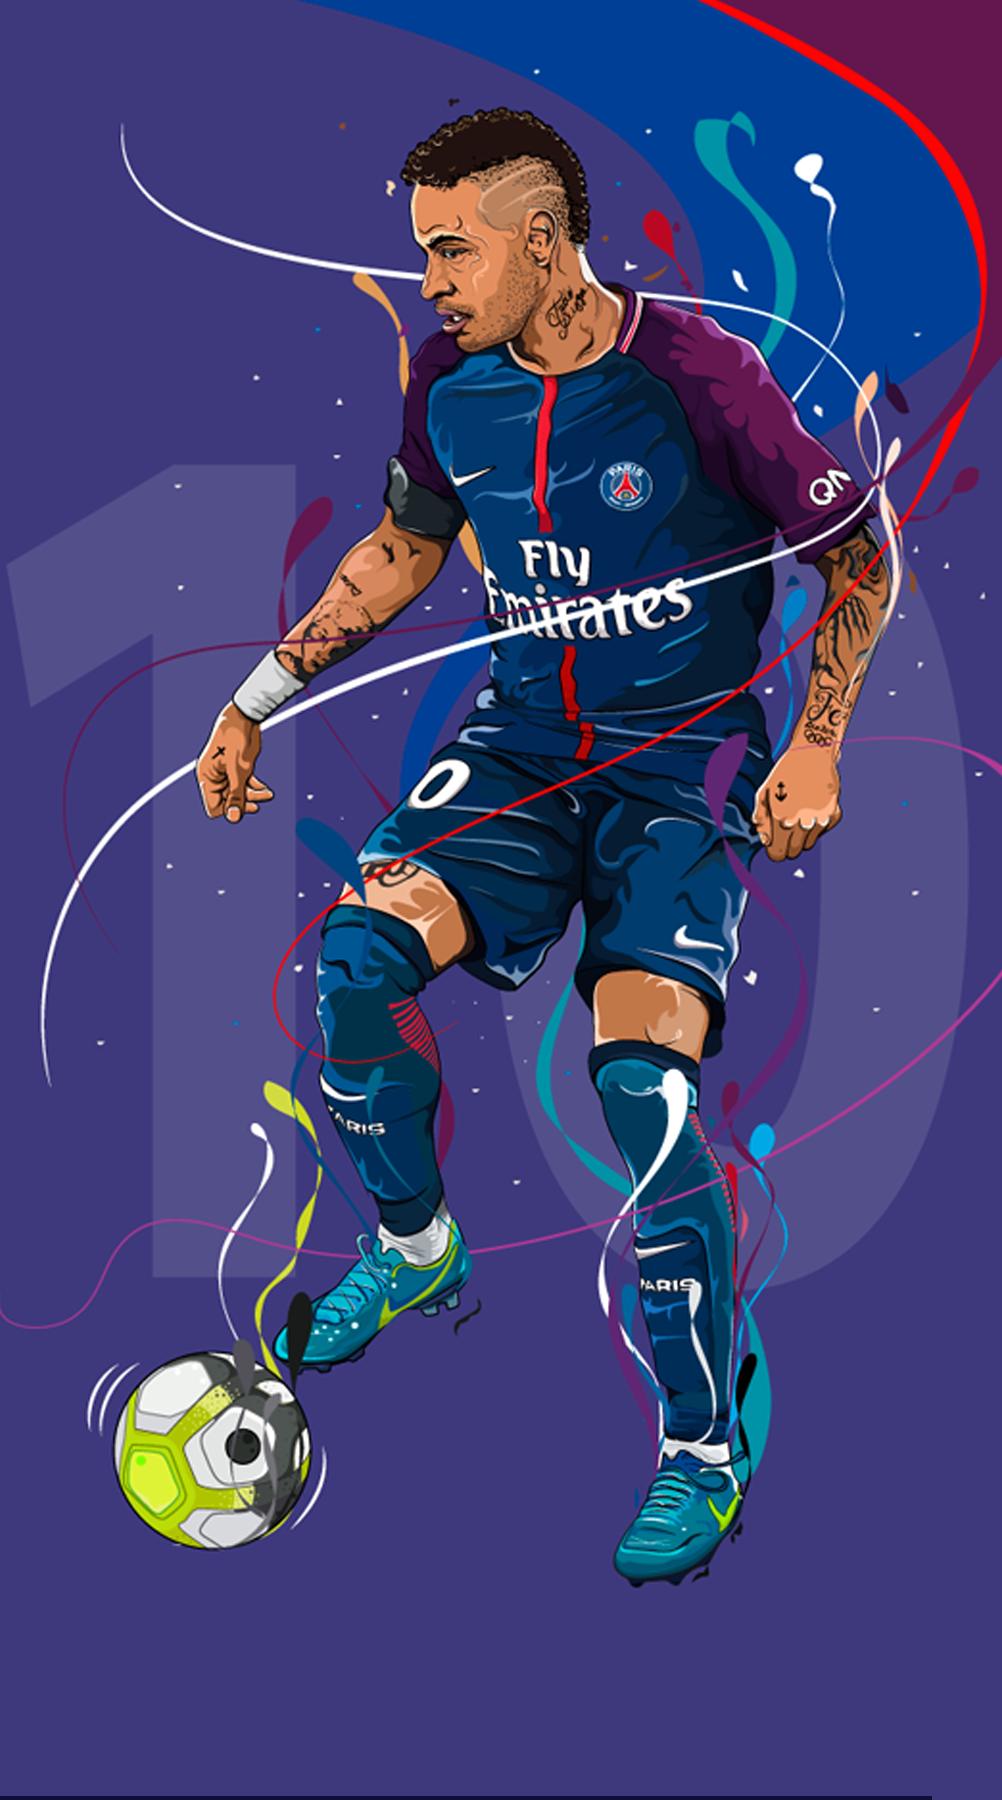 Neymar Jr Wallpapers Hd 4k 2018 For Android Apk Download